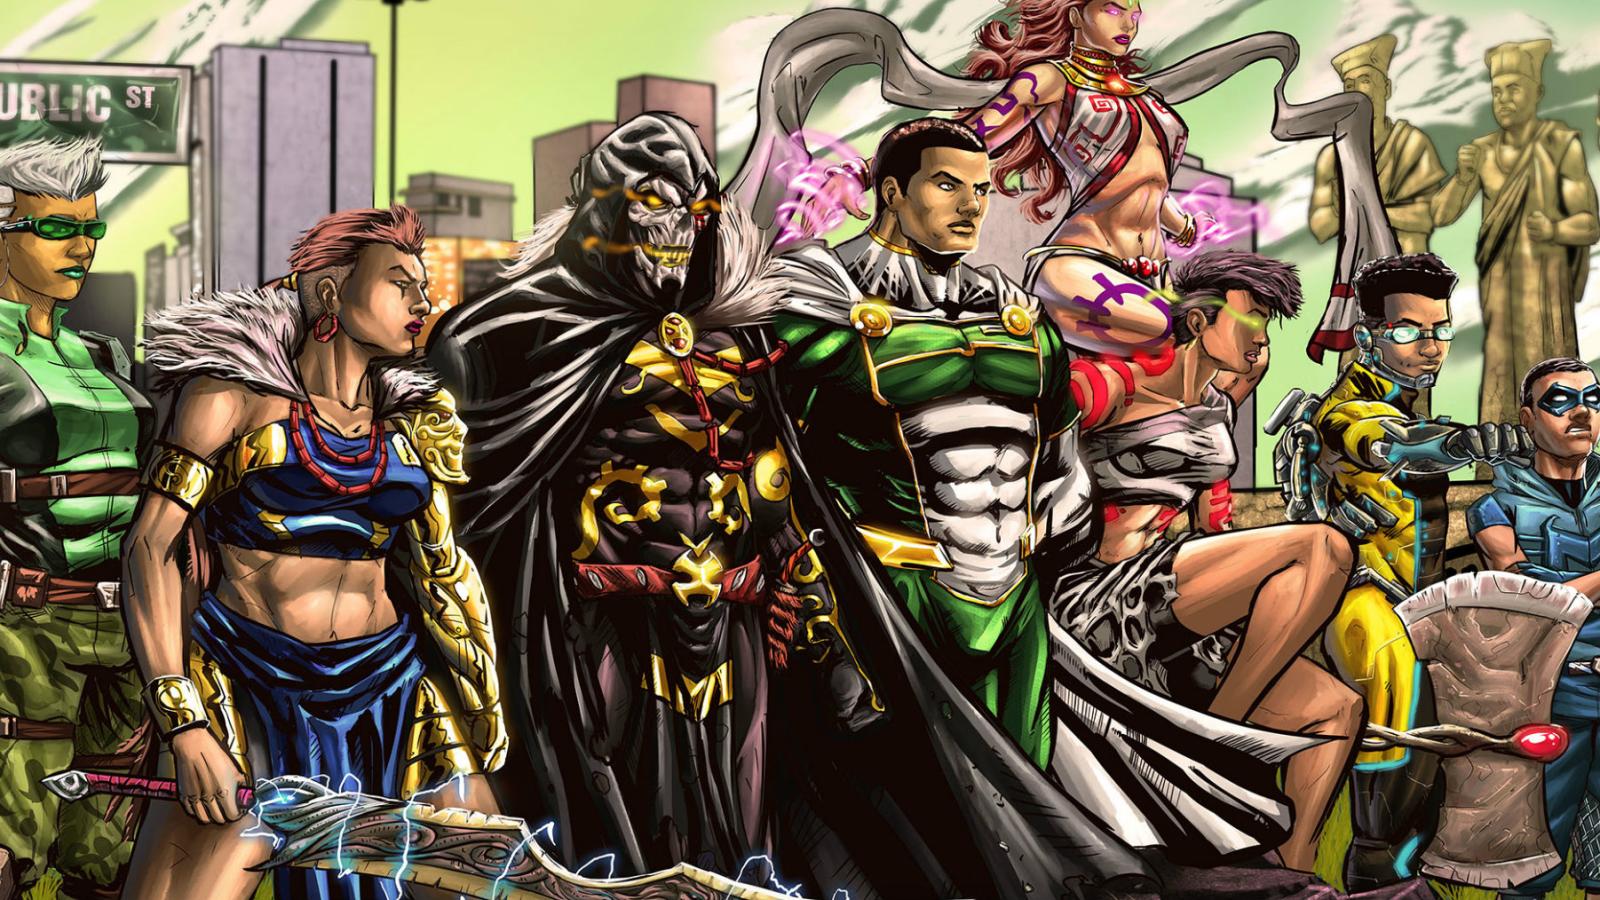 A Nigerian comics startup is creating African superheroes